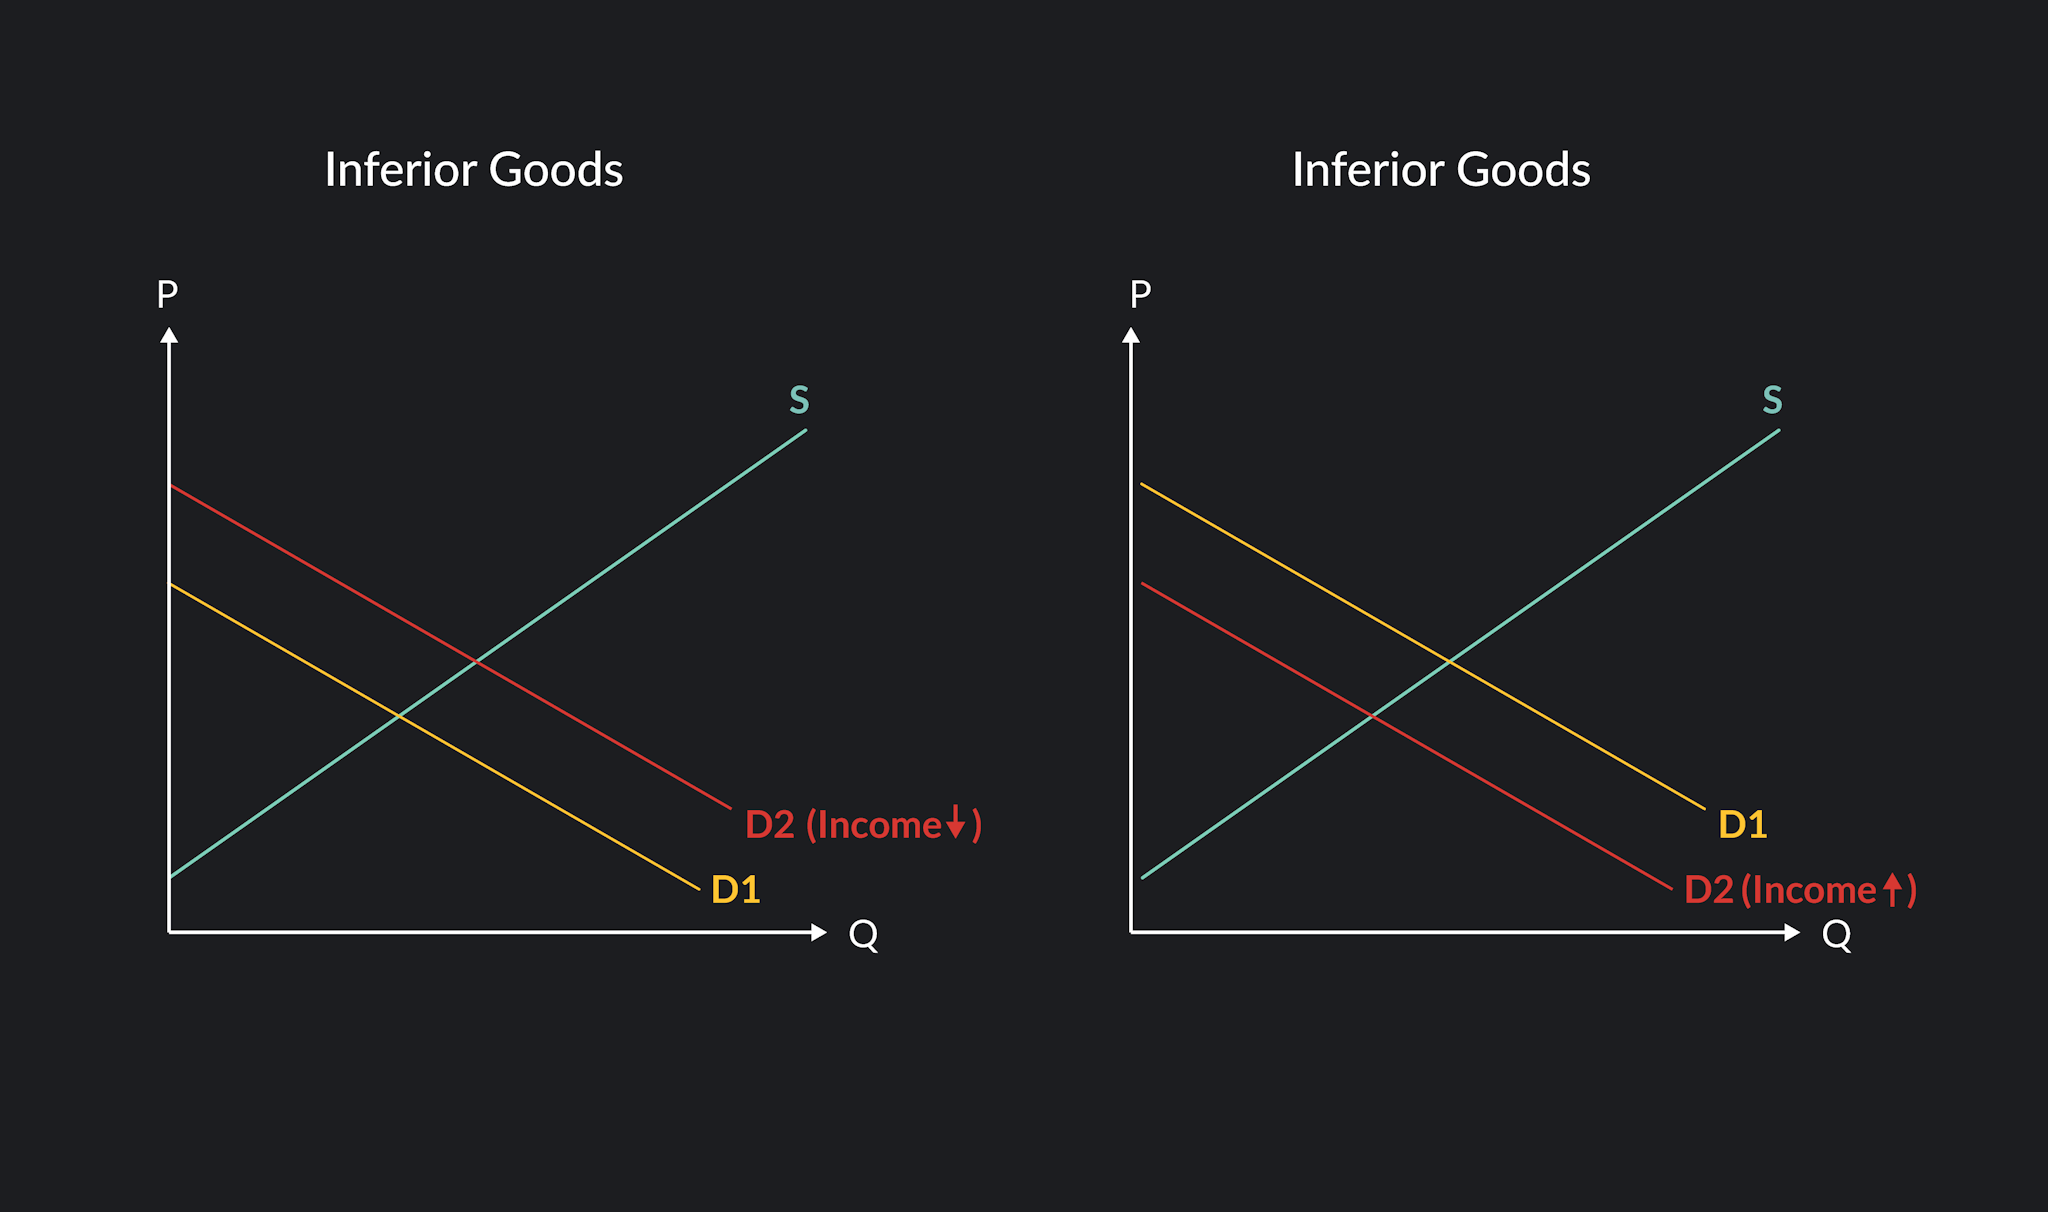 Normal goods vs inferior goods with income decrease